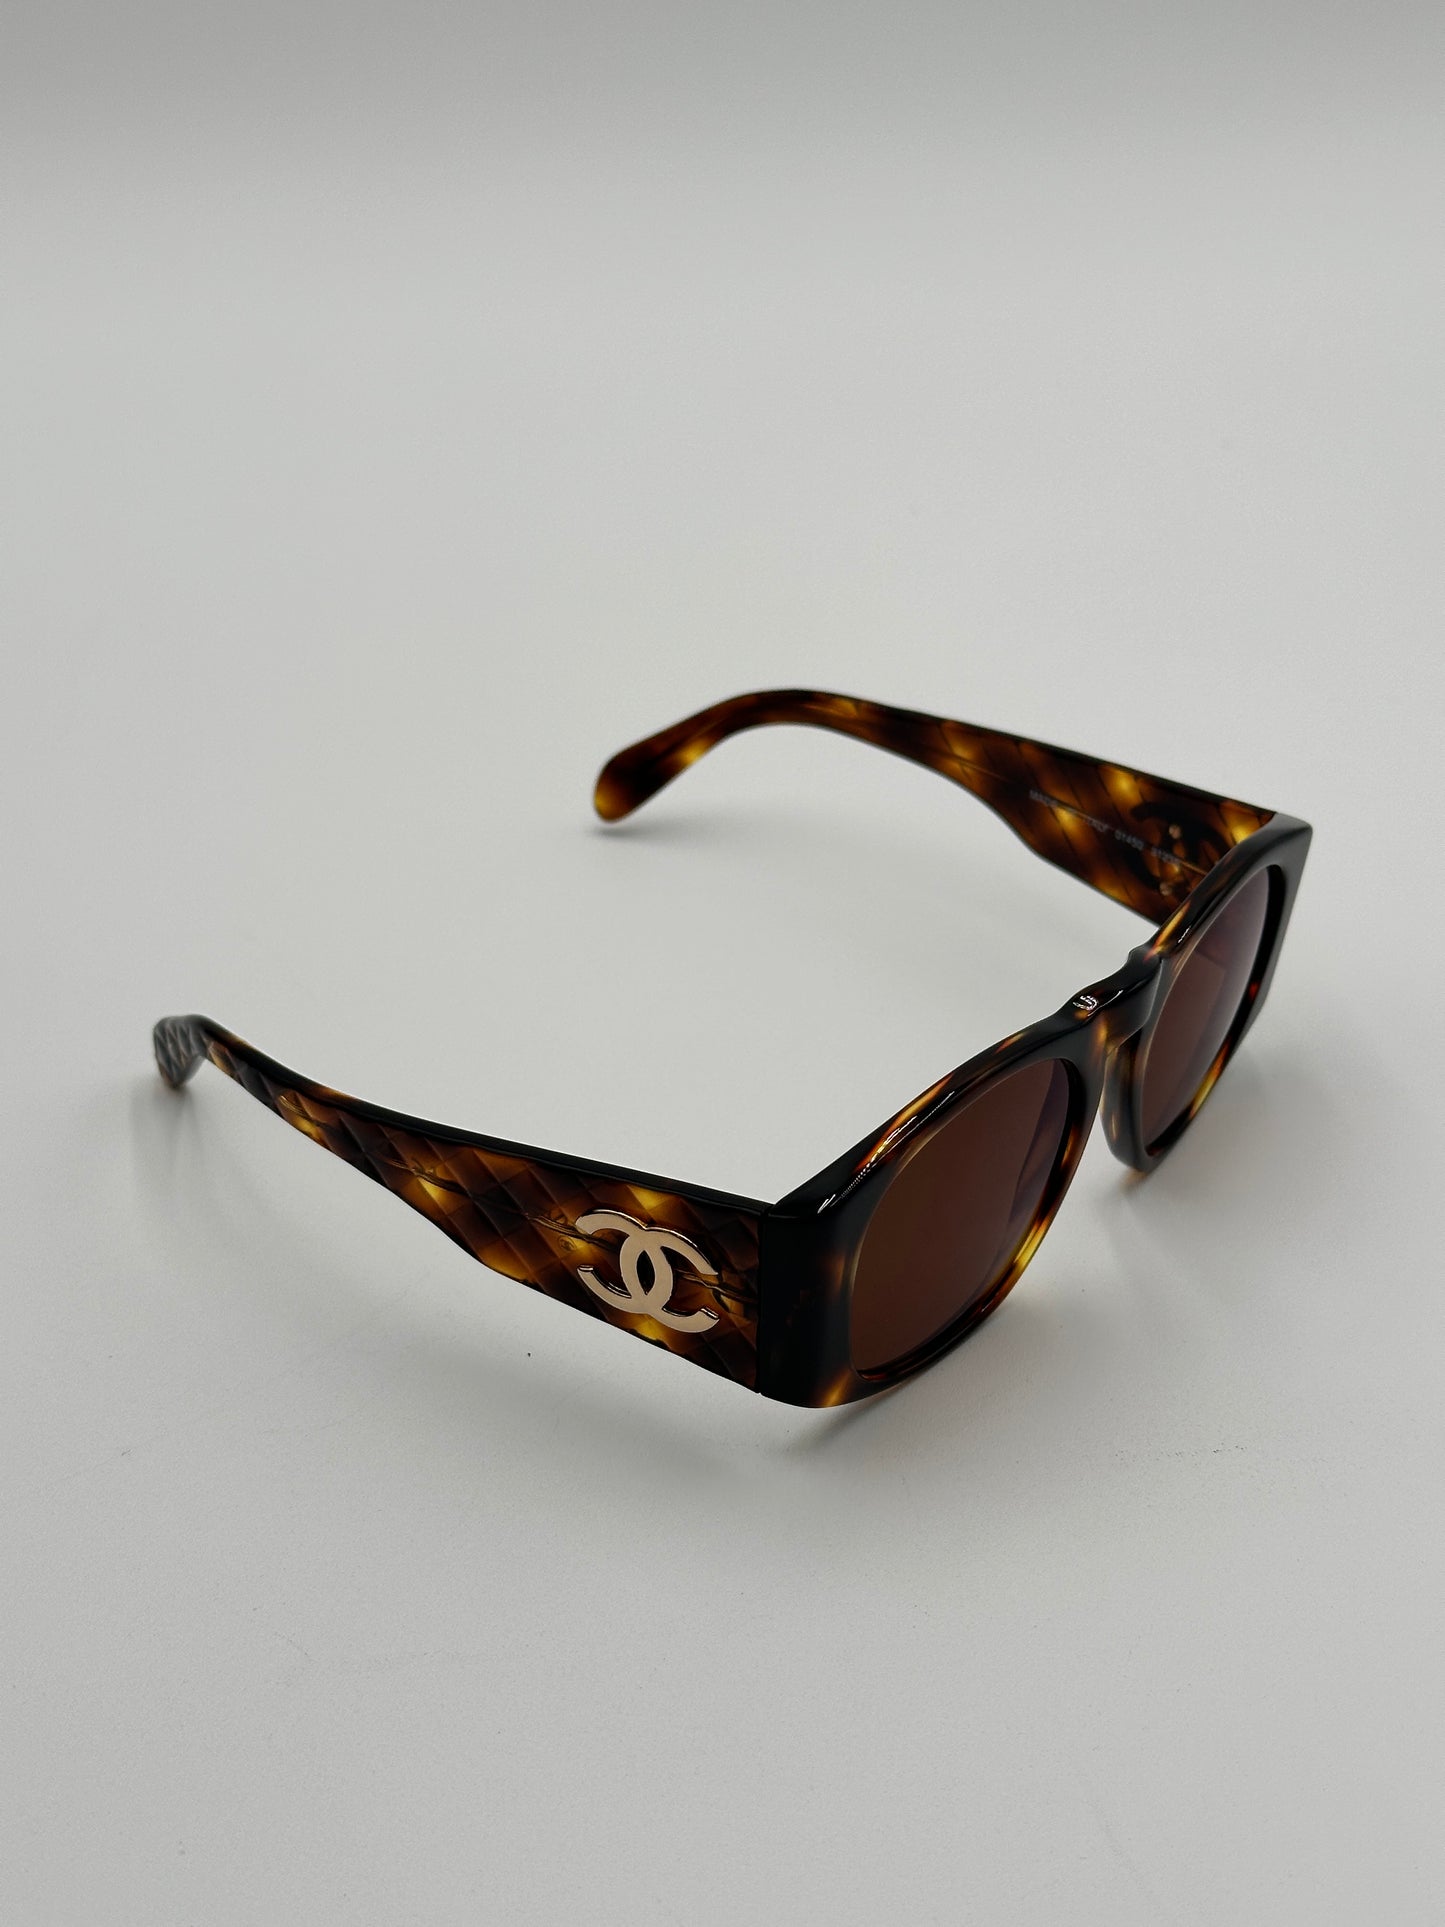 Authentic CHANEL CC Tortoise Quilted Logo Sunglasses